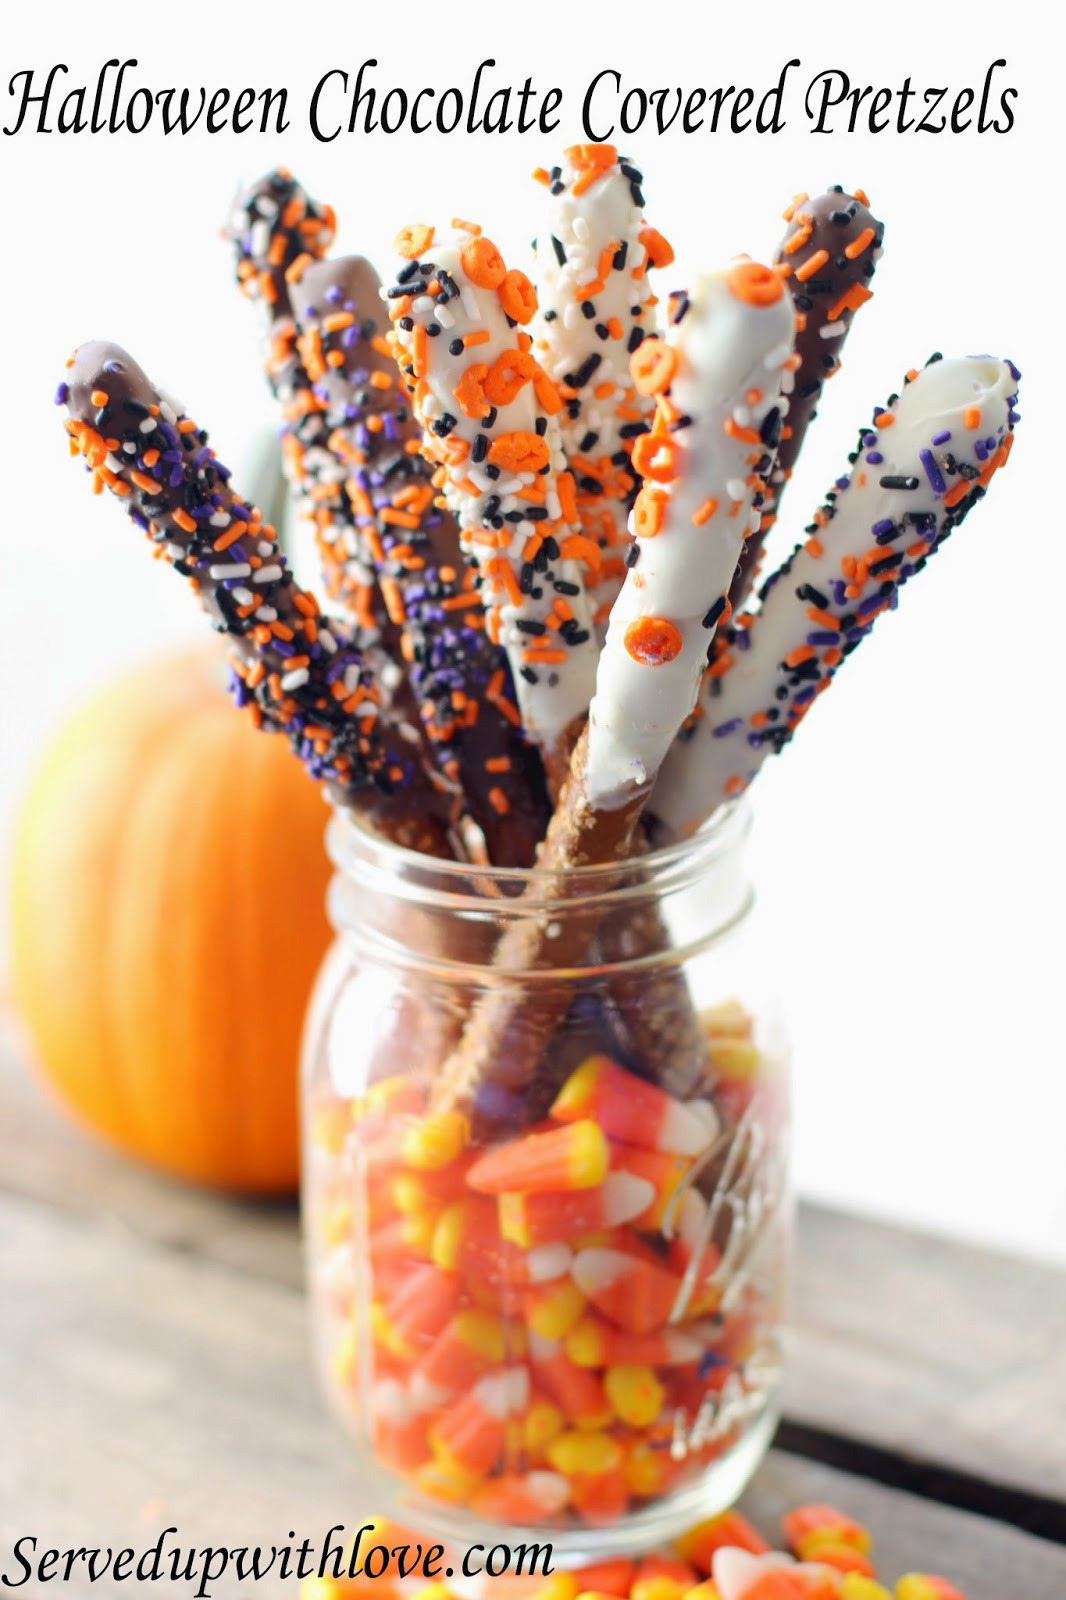 Chocolate Dipped Pretzels For Halloween
 Served Up With Love Halloween Chocolate Covered Pretzels